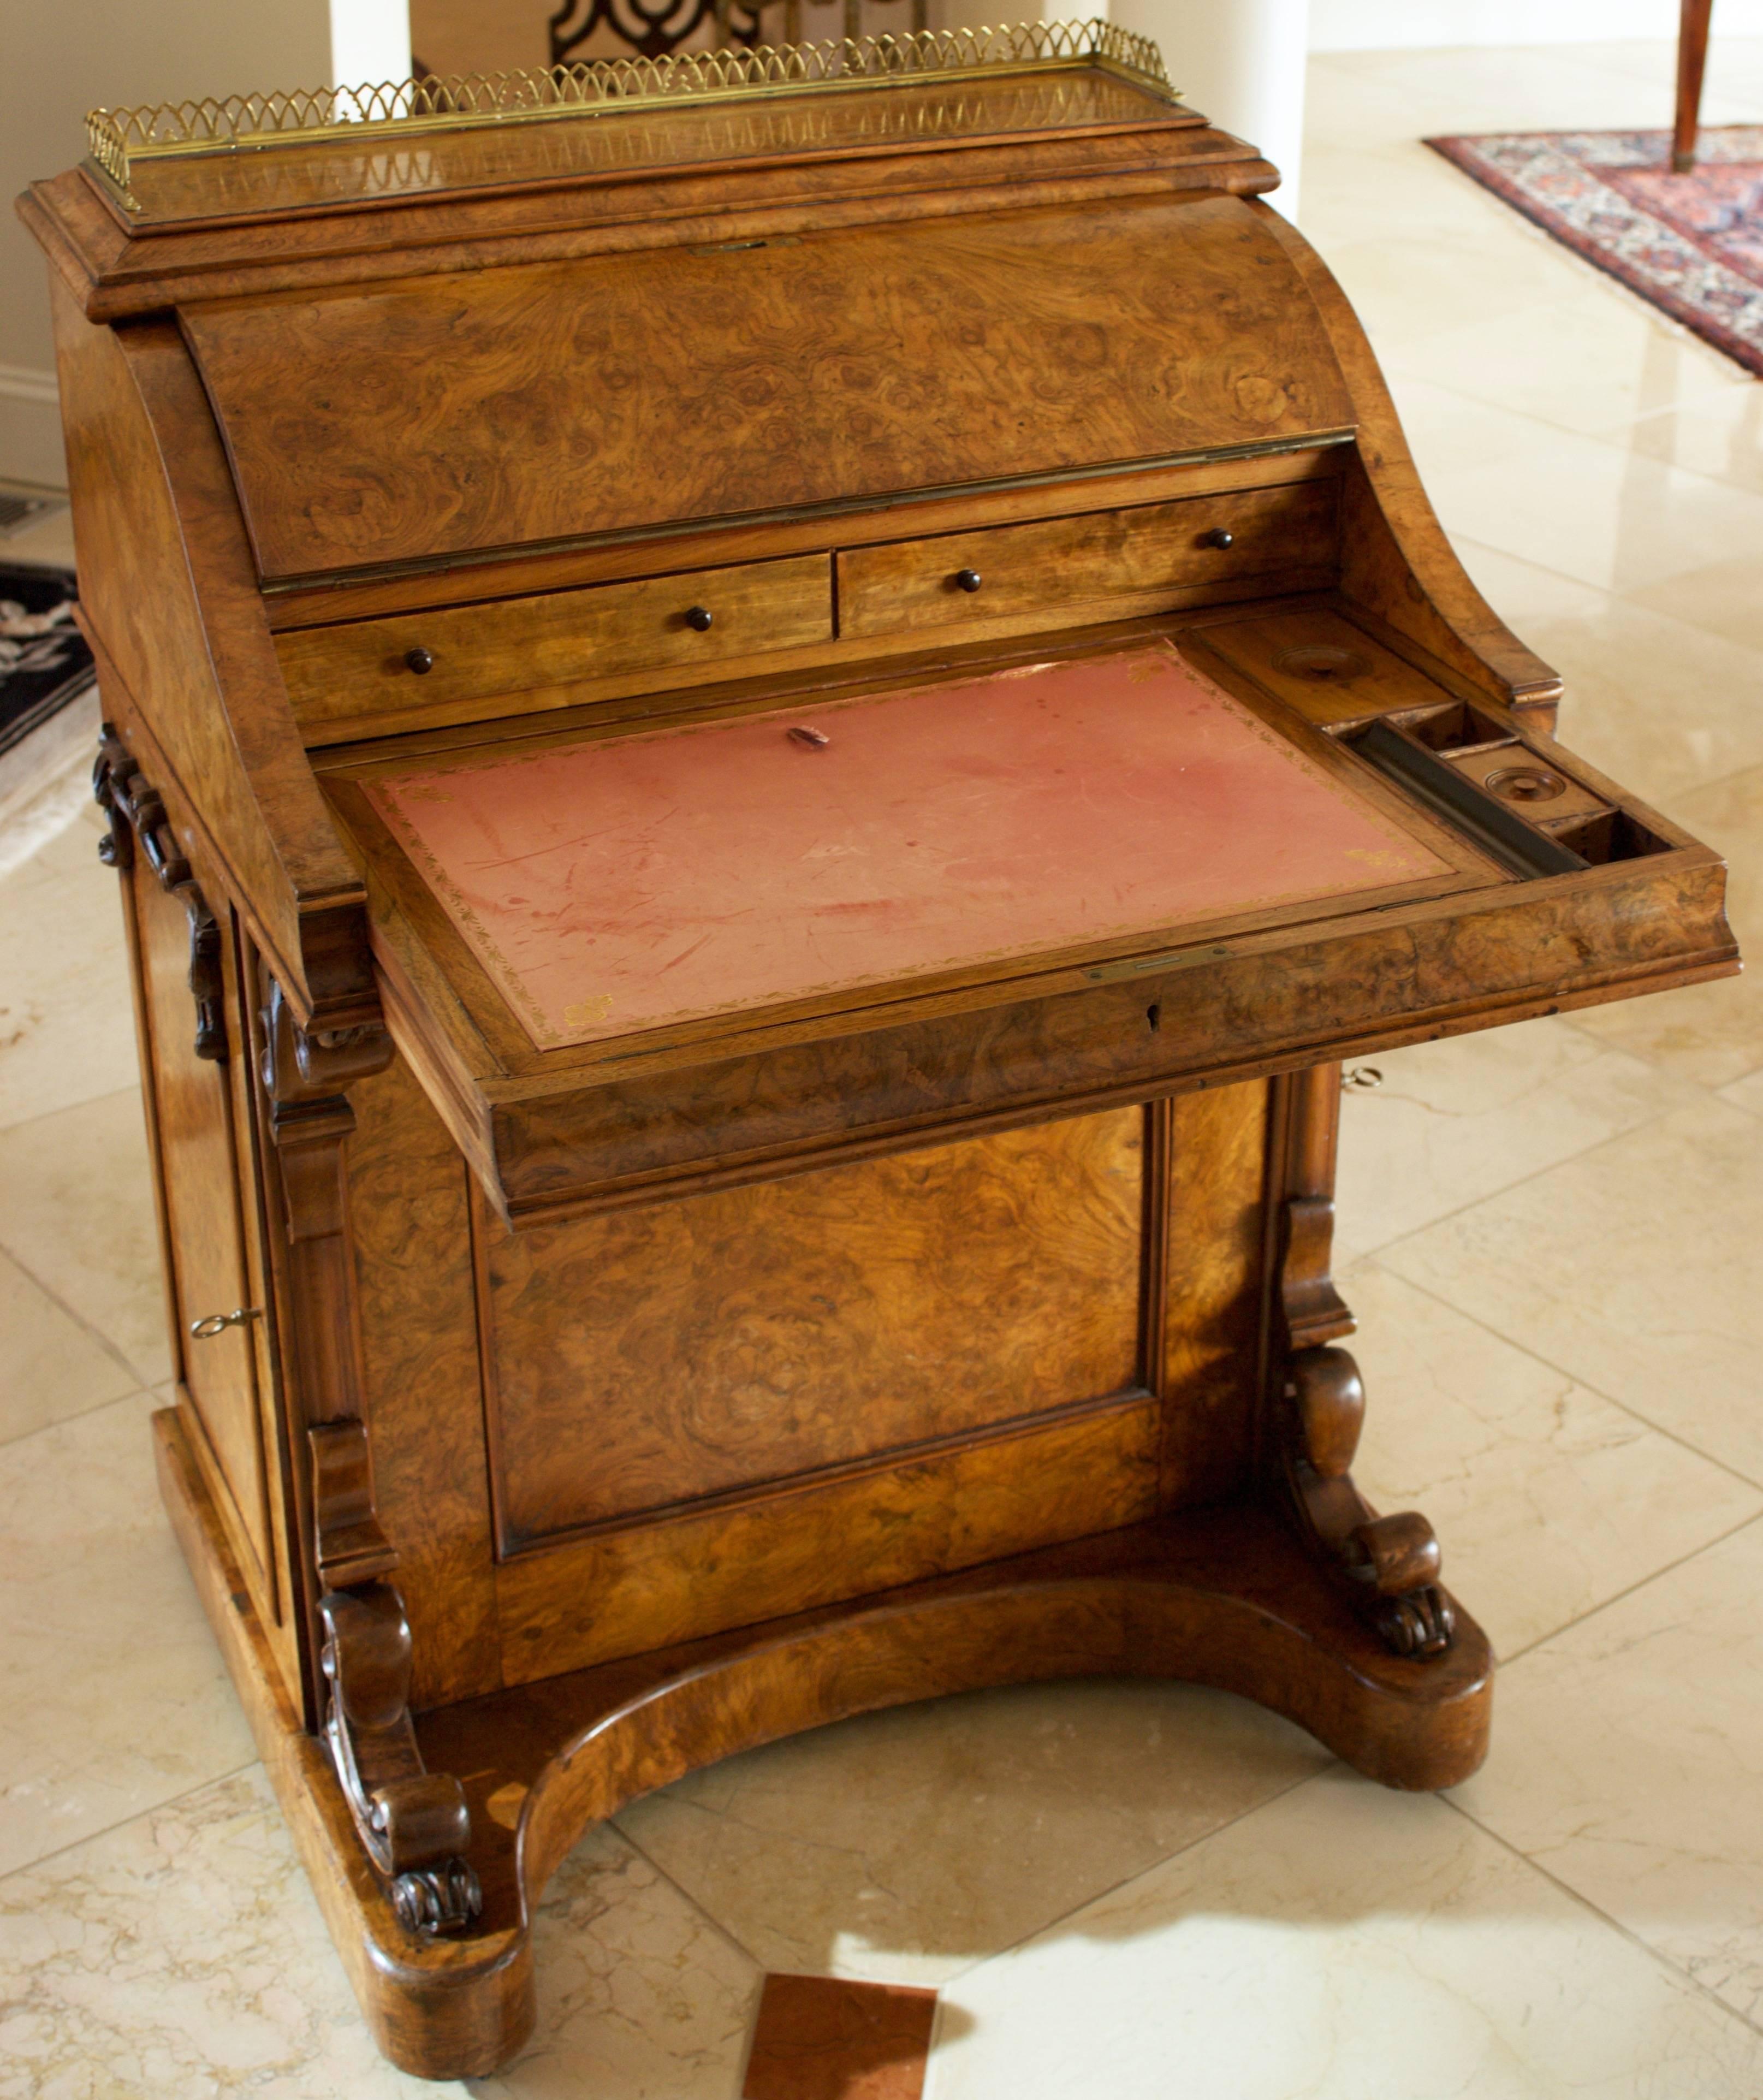 Fabulous Davenport desk from Victorian era in very rare burr elm. Comes with a pull-out writing slide with a raising tooled red leather writing surface, lidded pen and ink boxes and a secret pin to release a pop-up top revealing two drawers and four